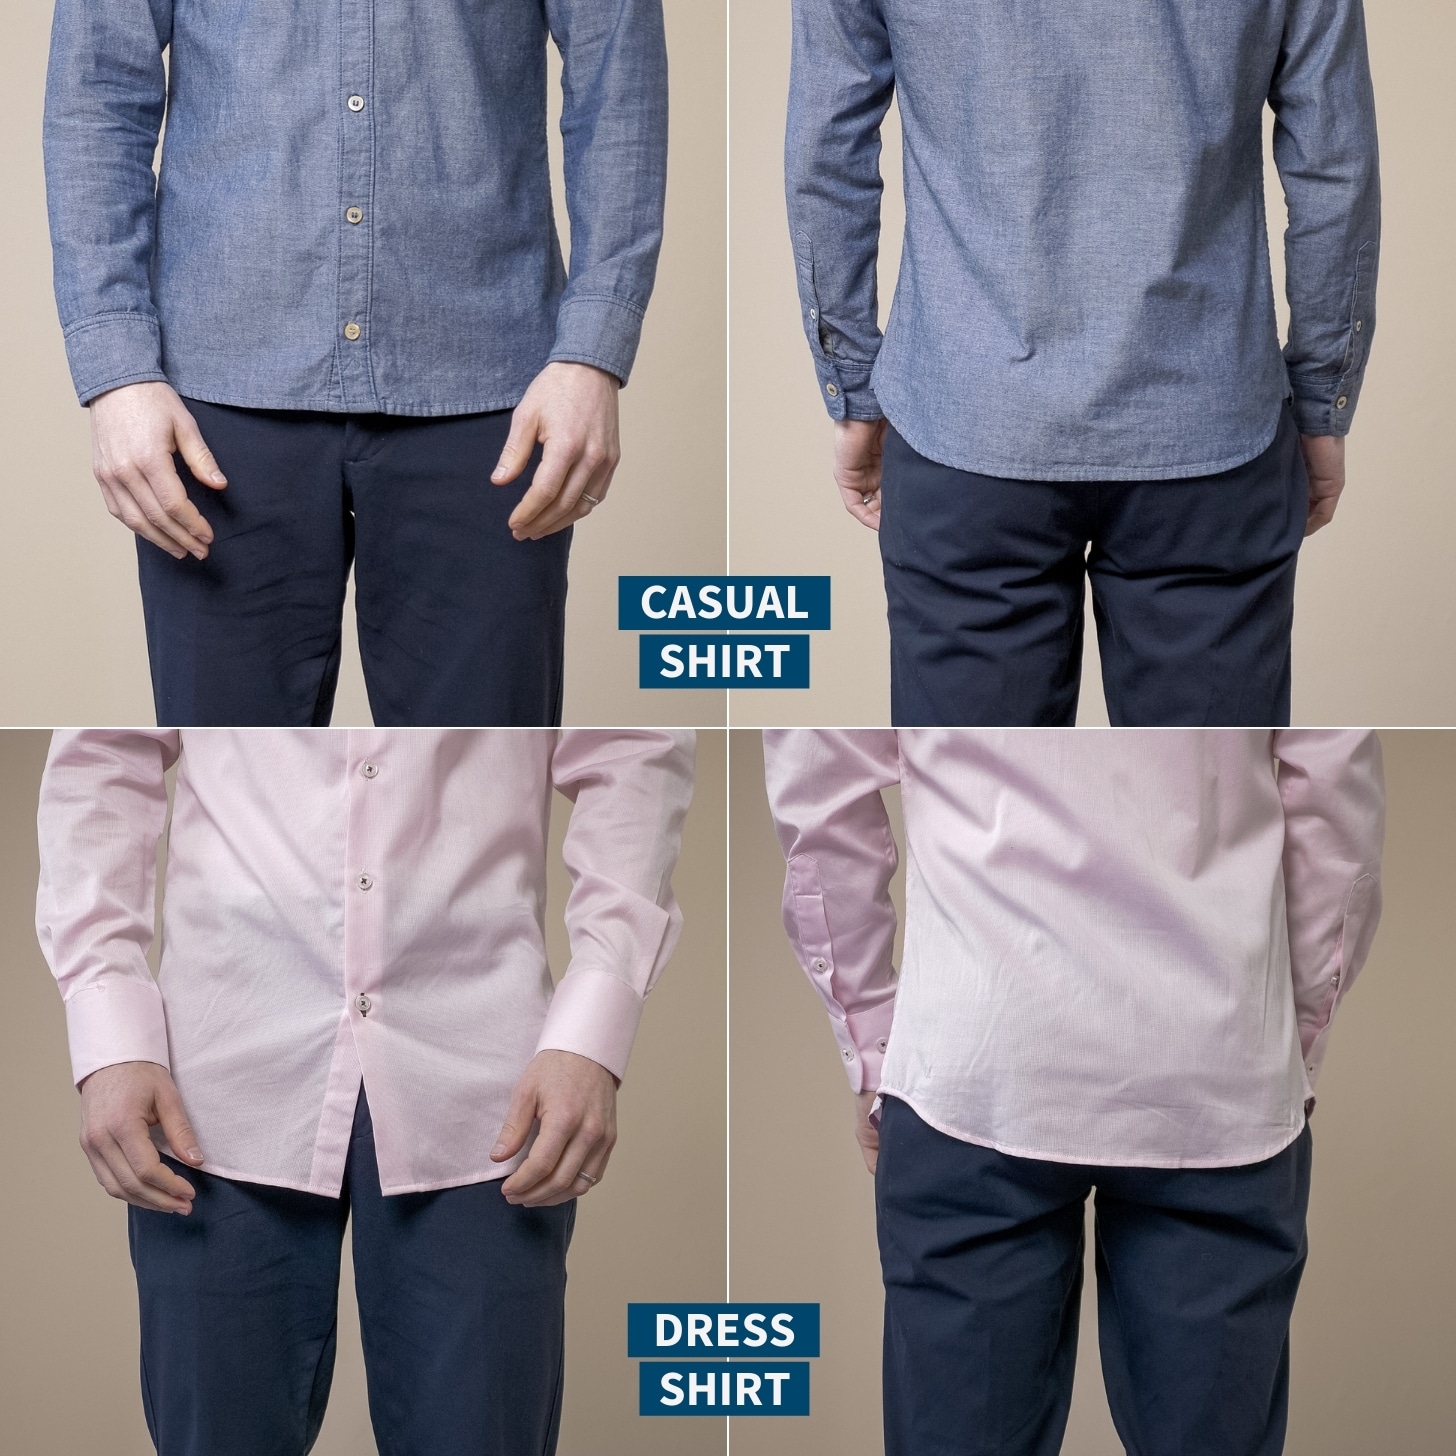 How an Untucked Shirt Should Fit - A Complete Guide to Button-Ups